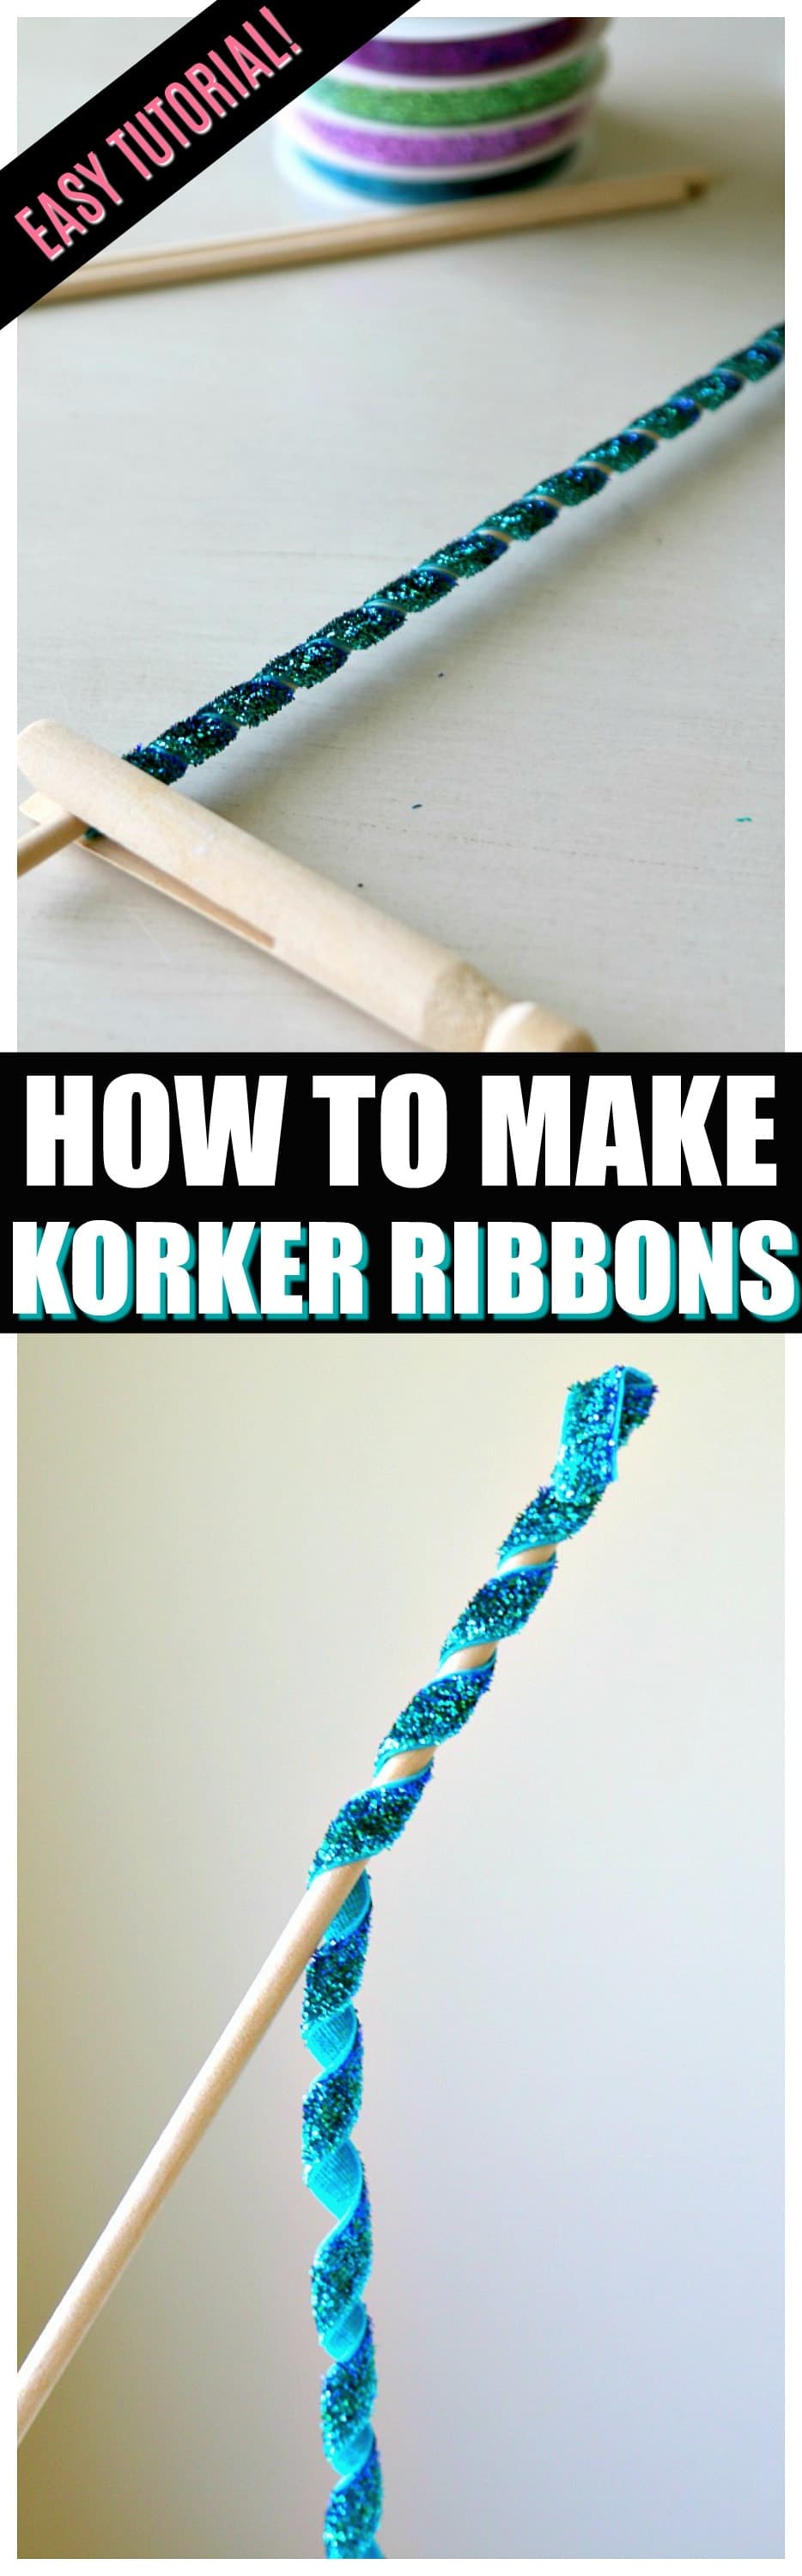 Photos showing how to make a Korker Ribbon Tutorial from start to finish.